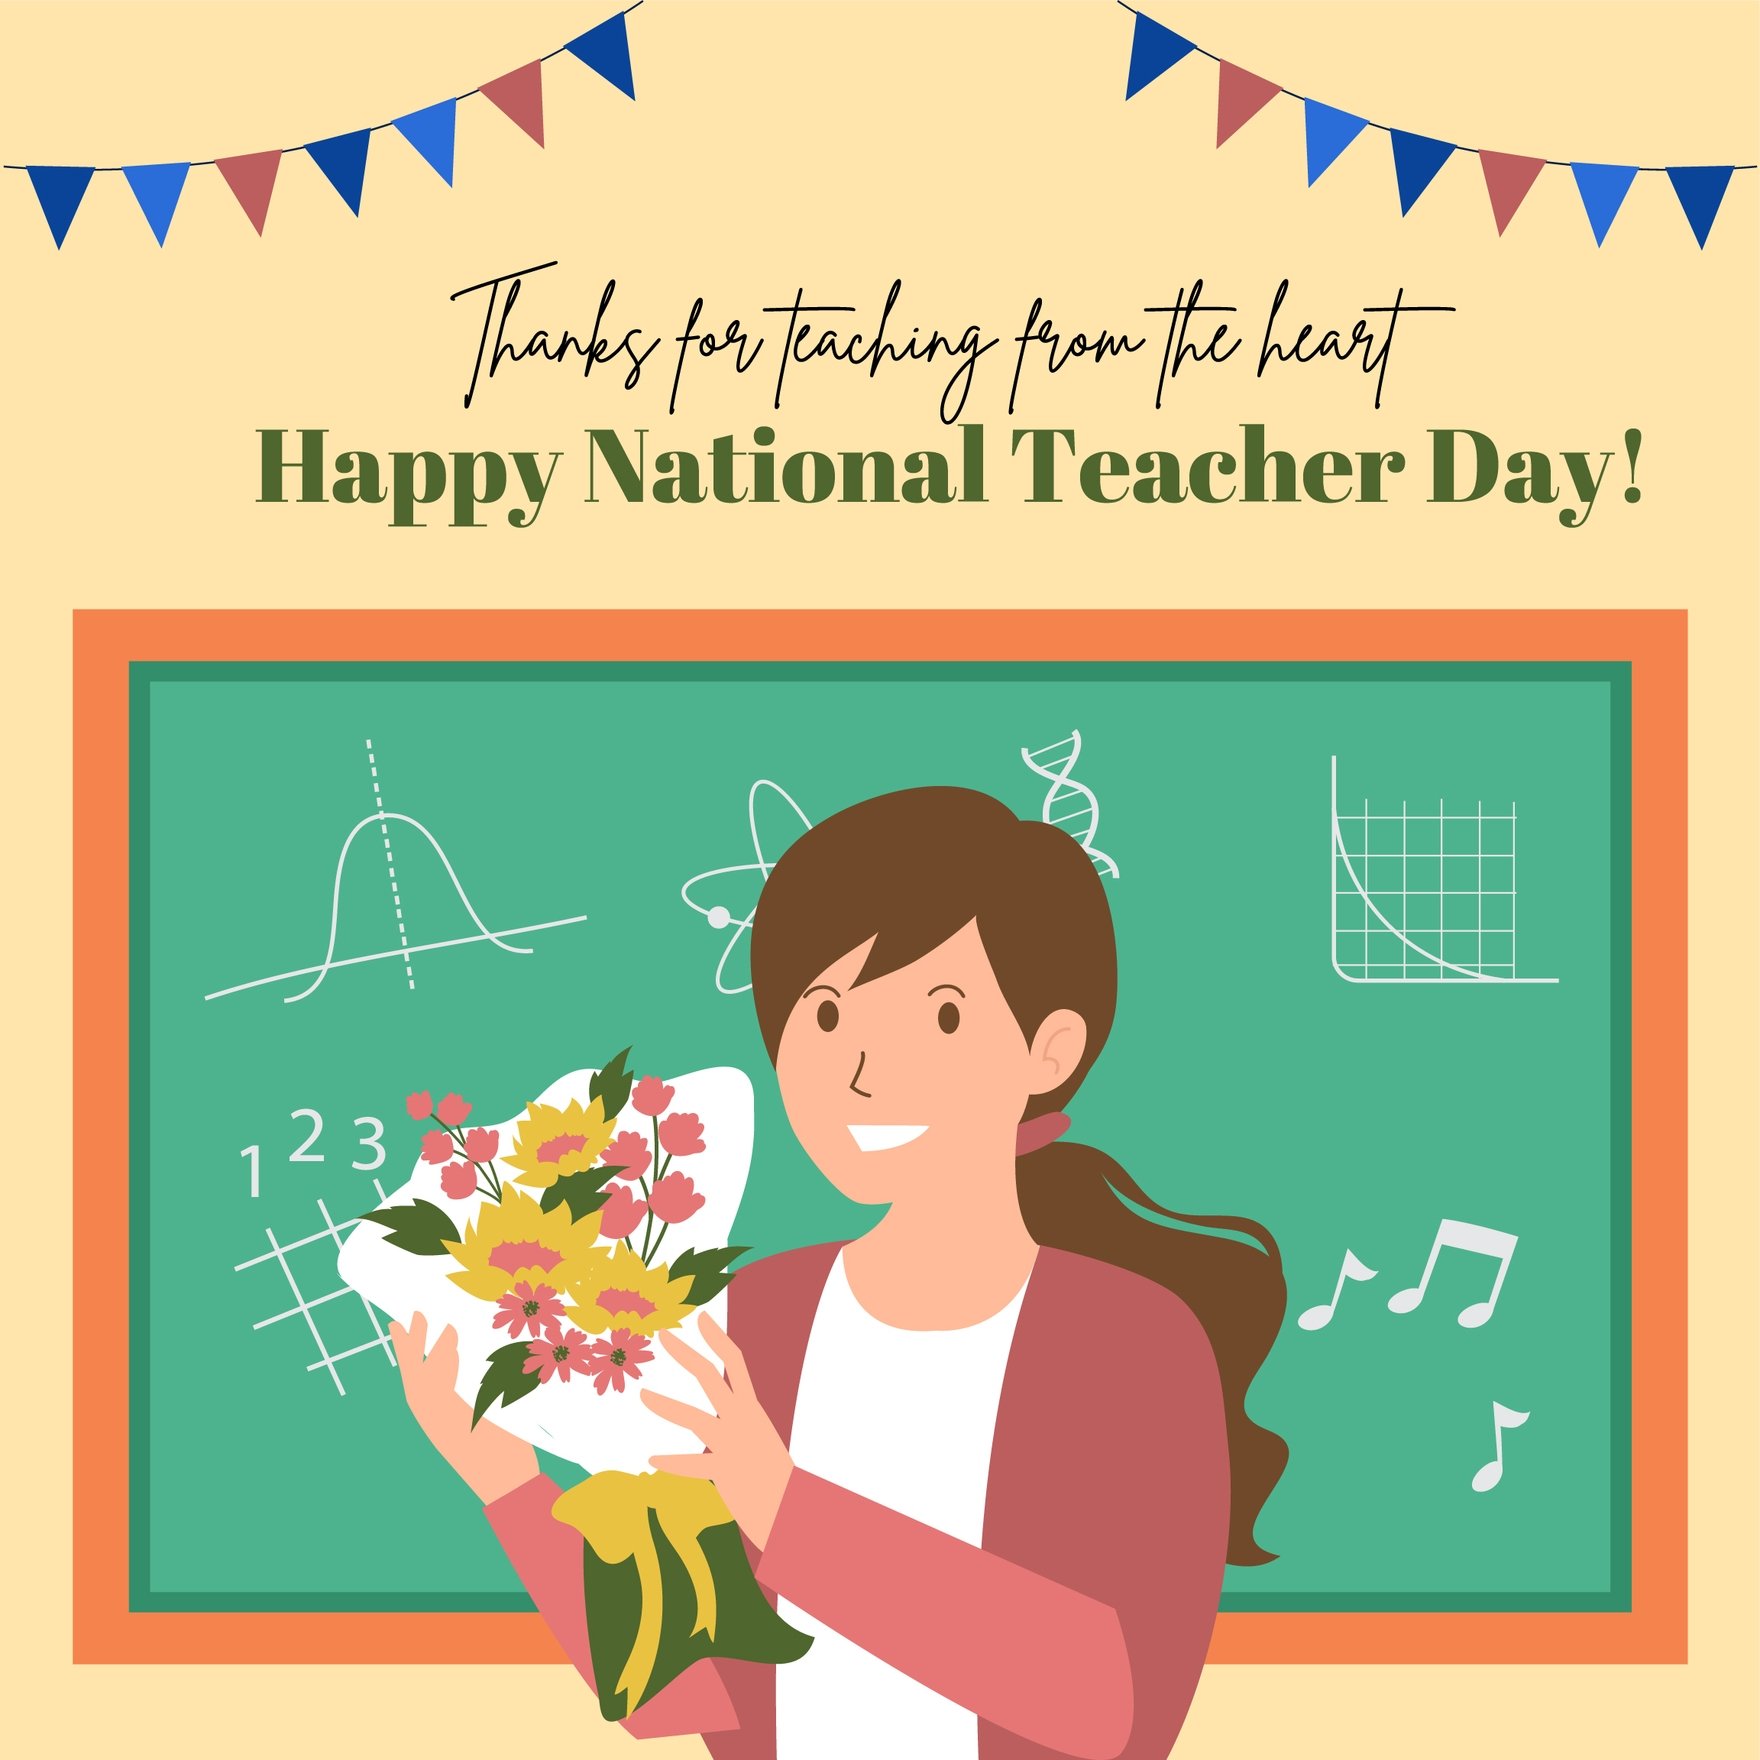 Free National Teacher Day Drawing Vector Download in Illustrator, PSD